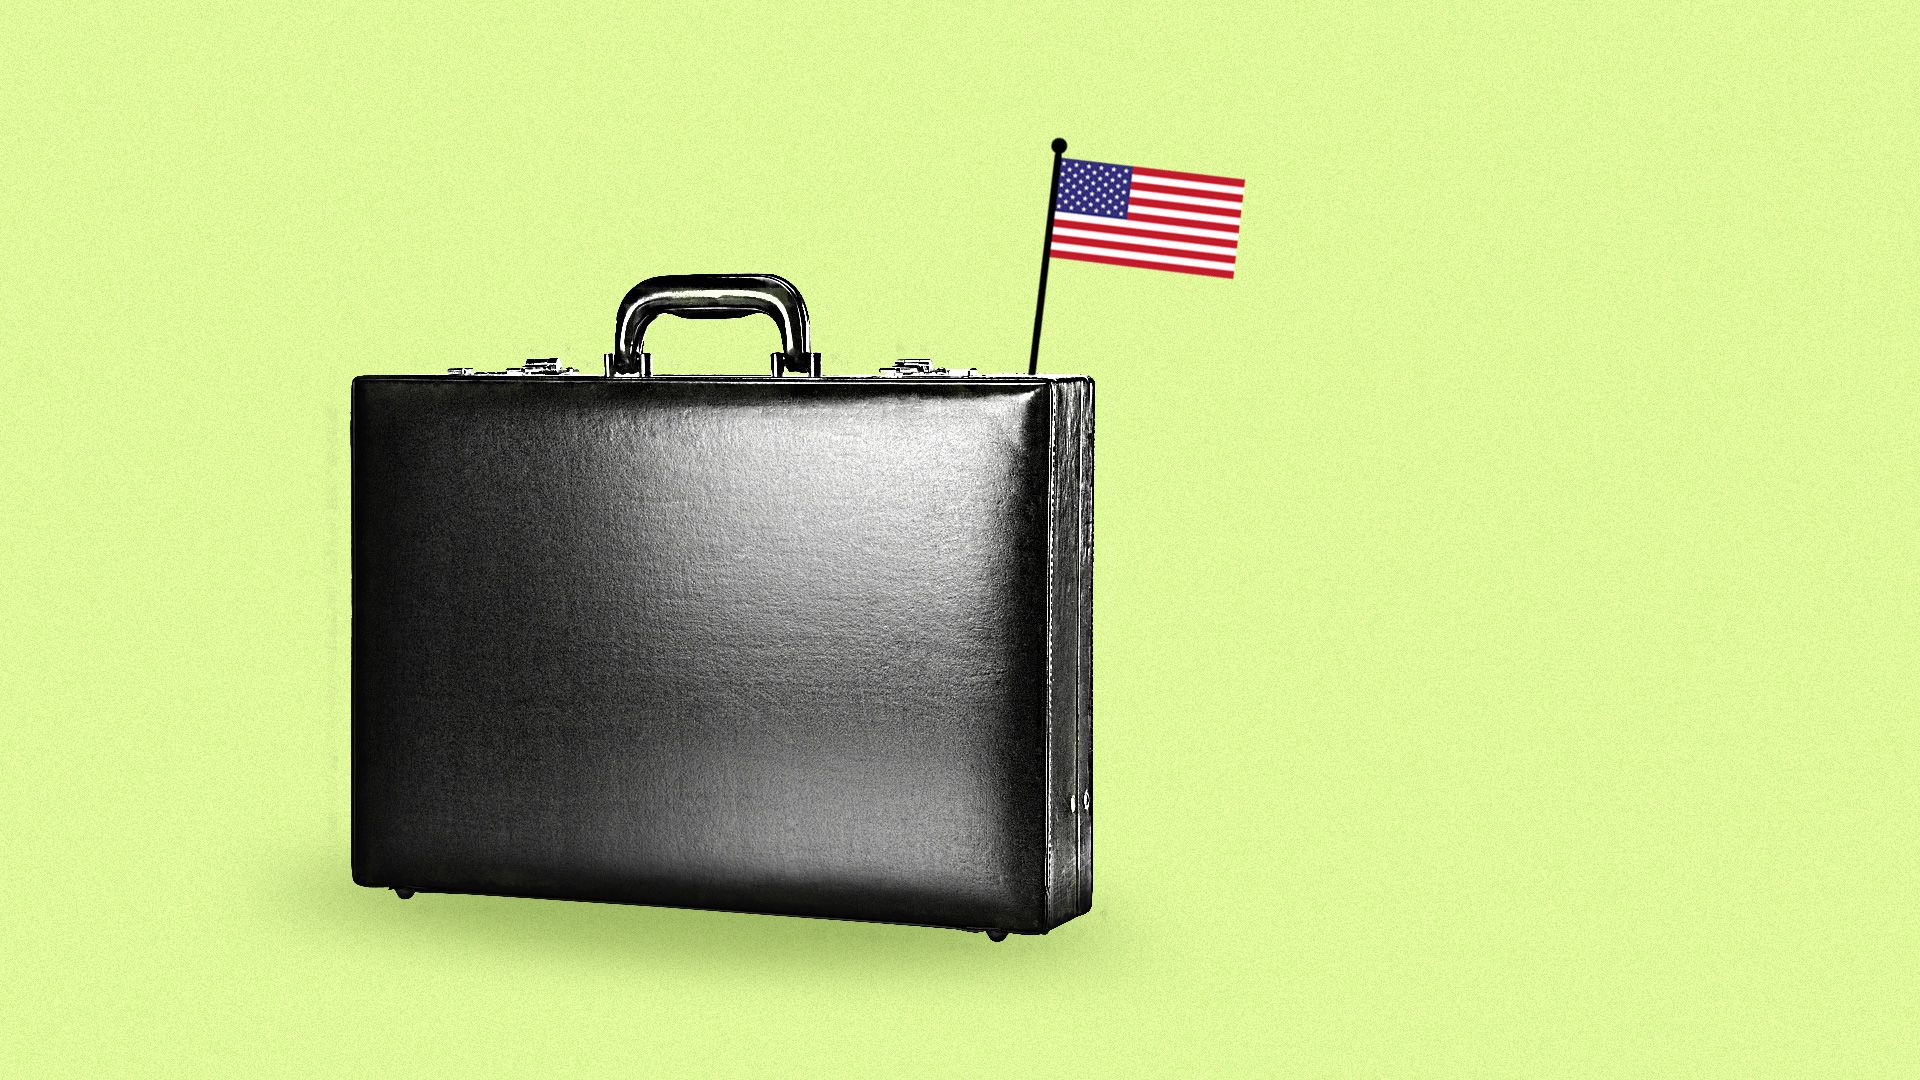 An American Flag planted on a briefcase